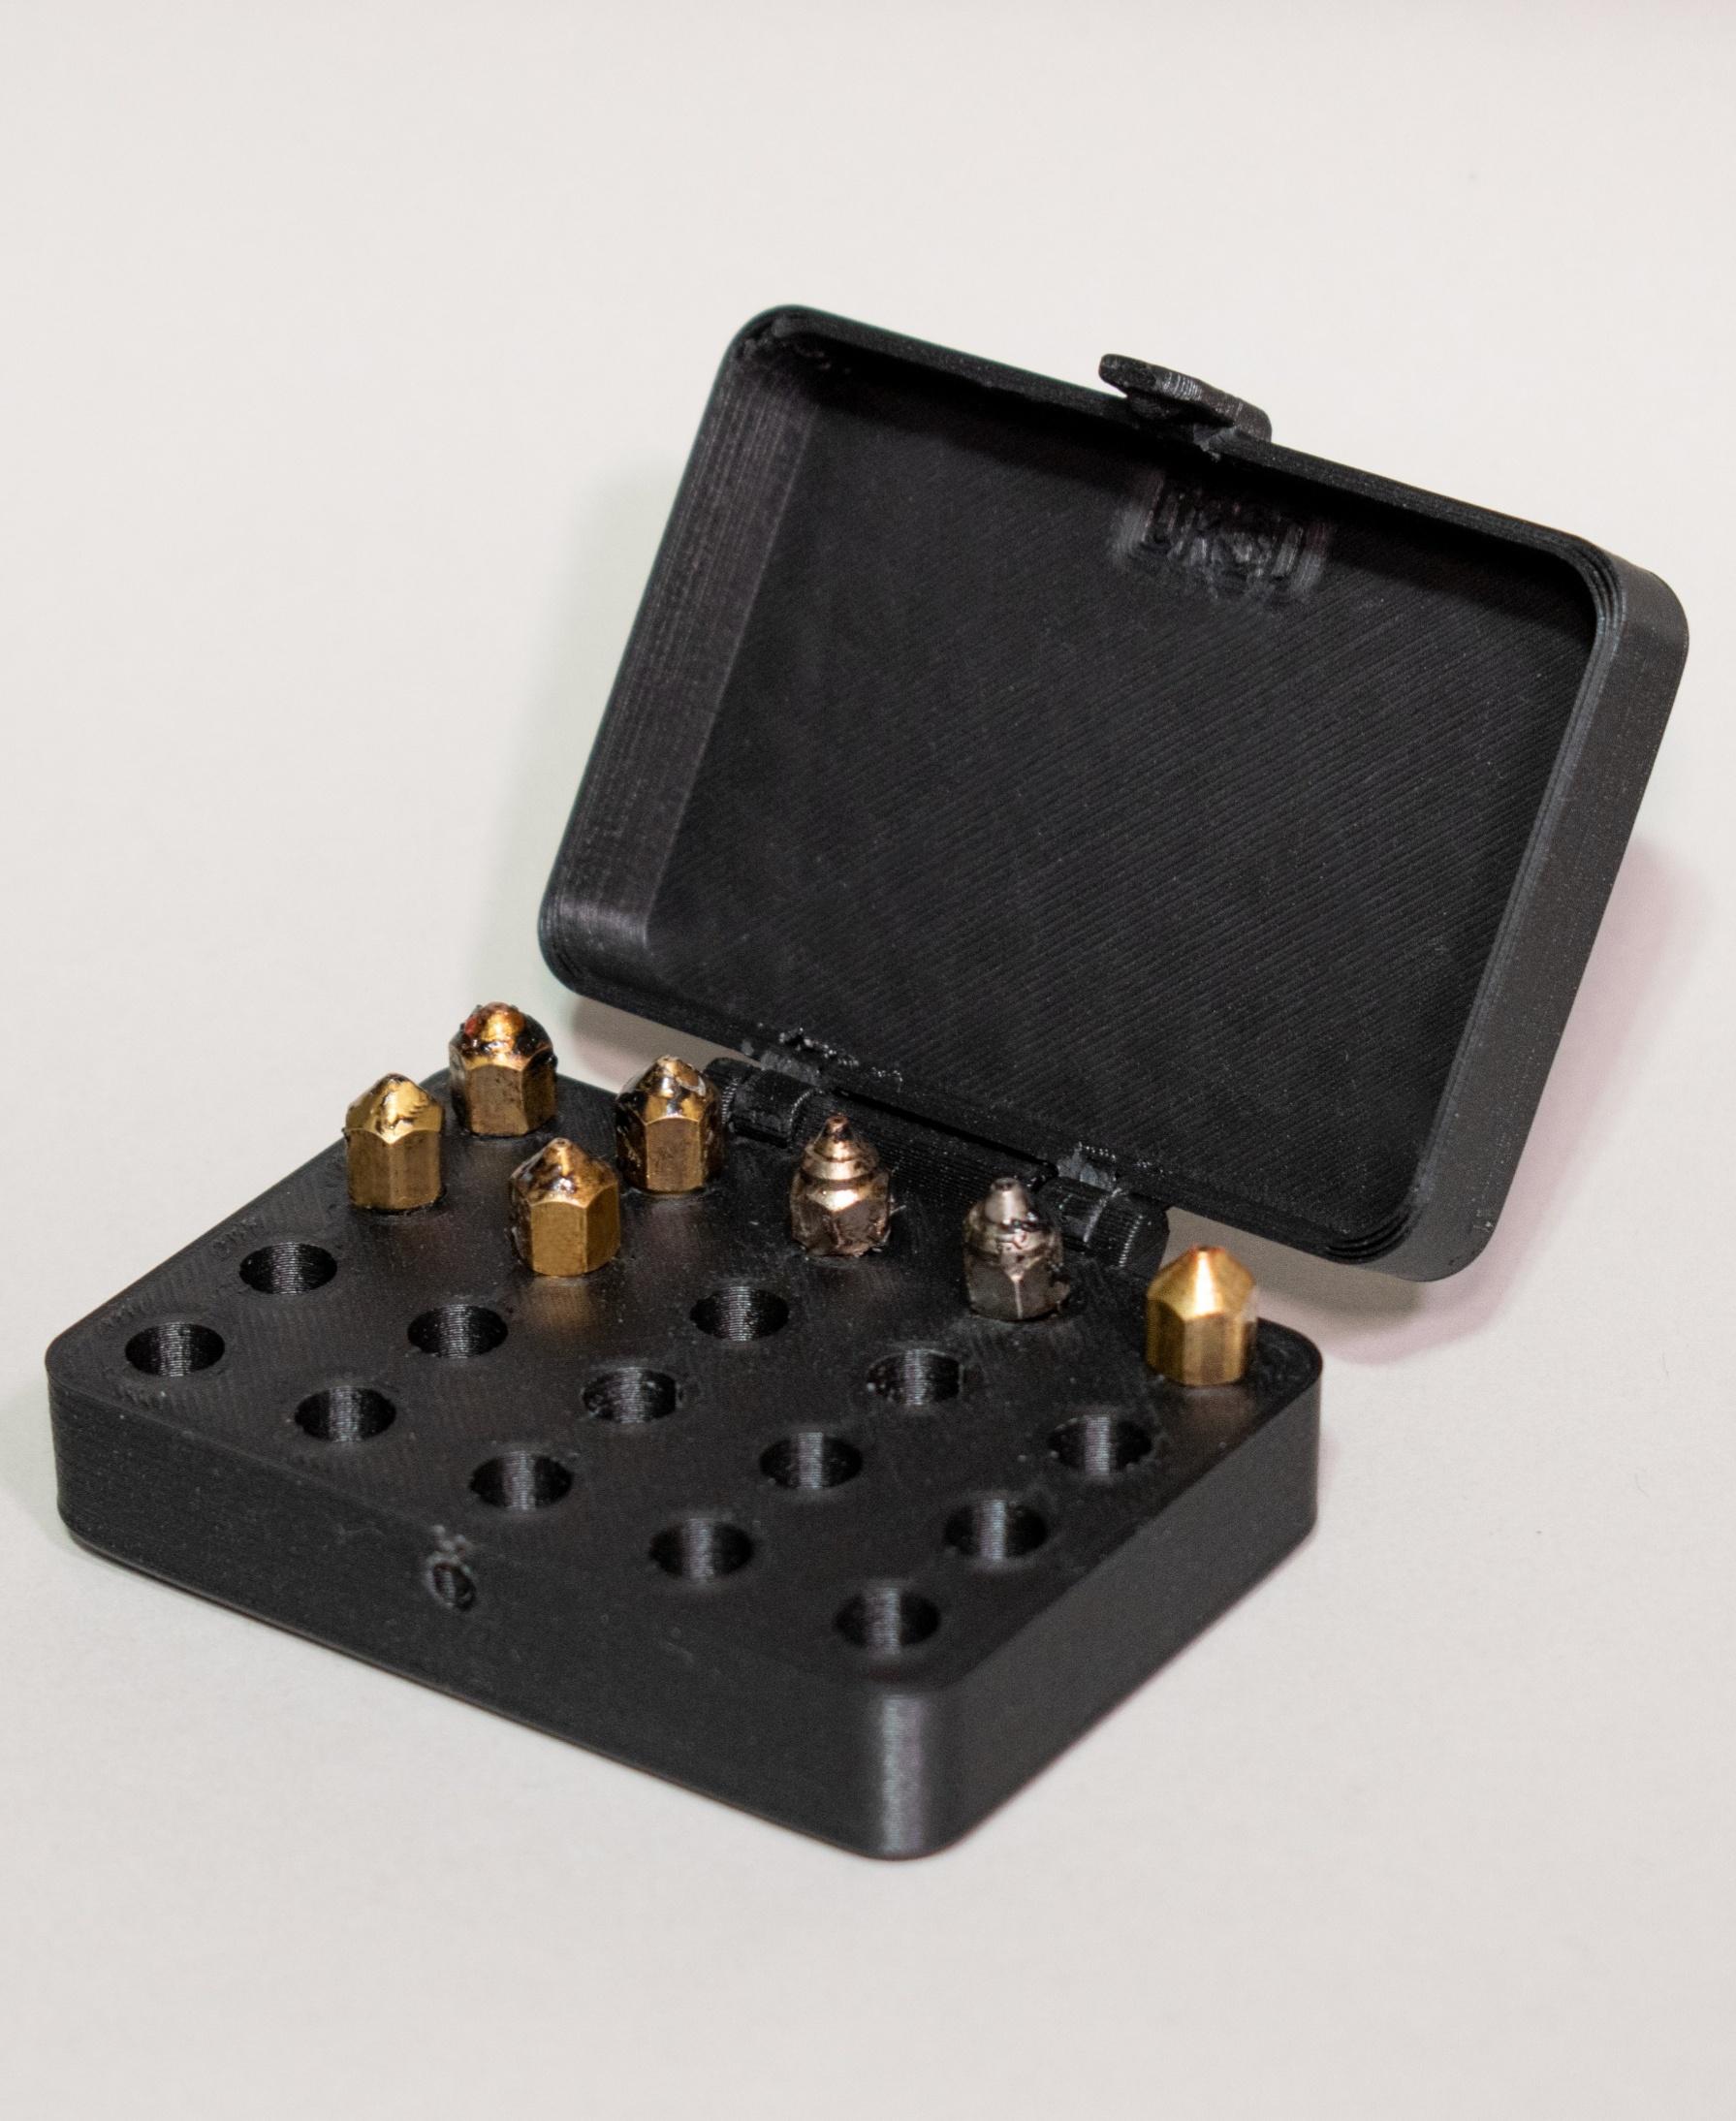 Print In Place 3D Printer Nozzle Holder Box - Holds 20 Nozzles 3d model